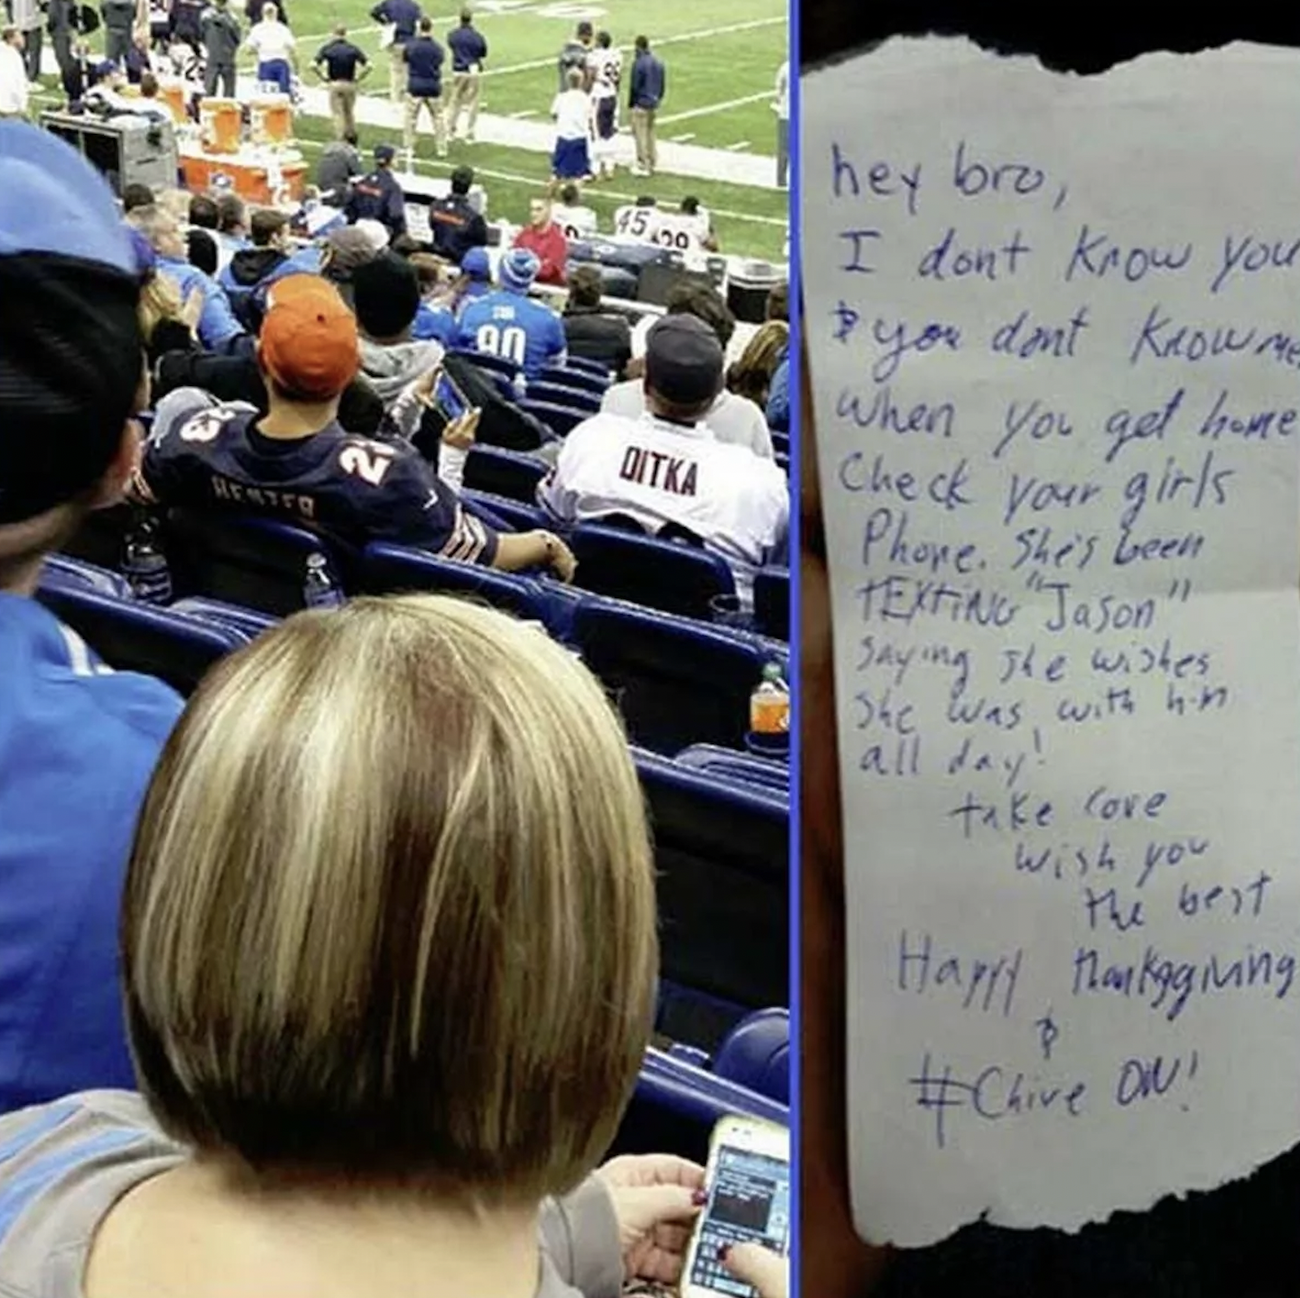 Guy sees woman texting another man at a football game, and slips boyfriend this note. 